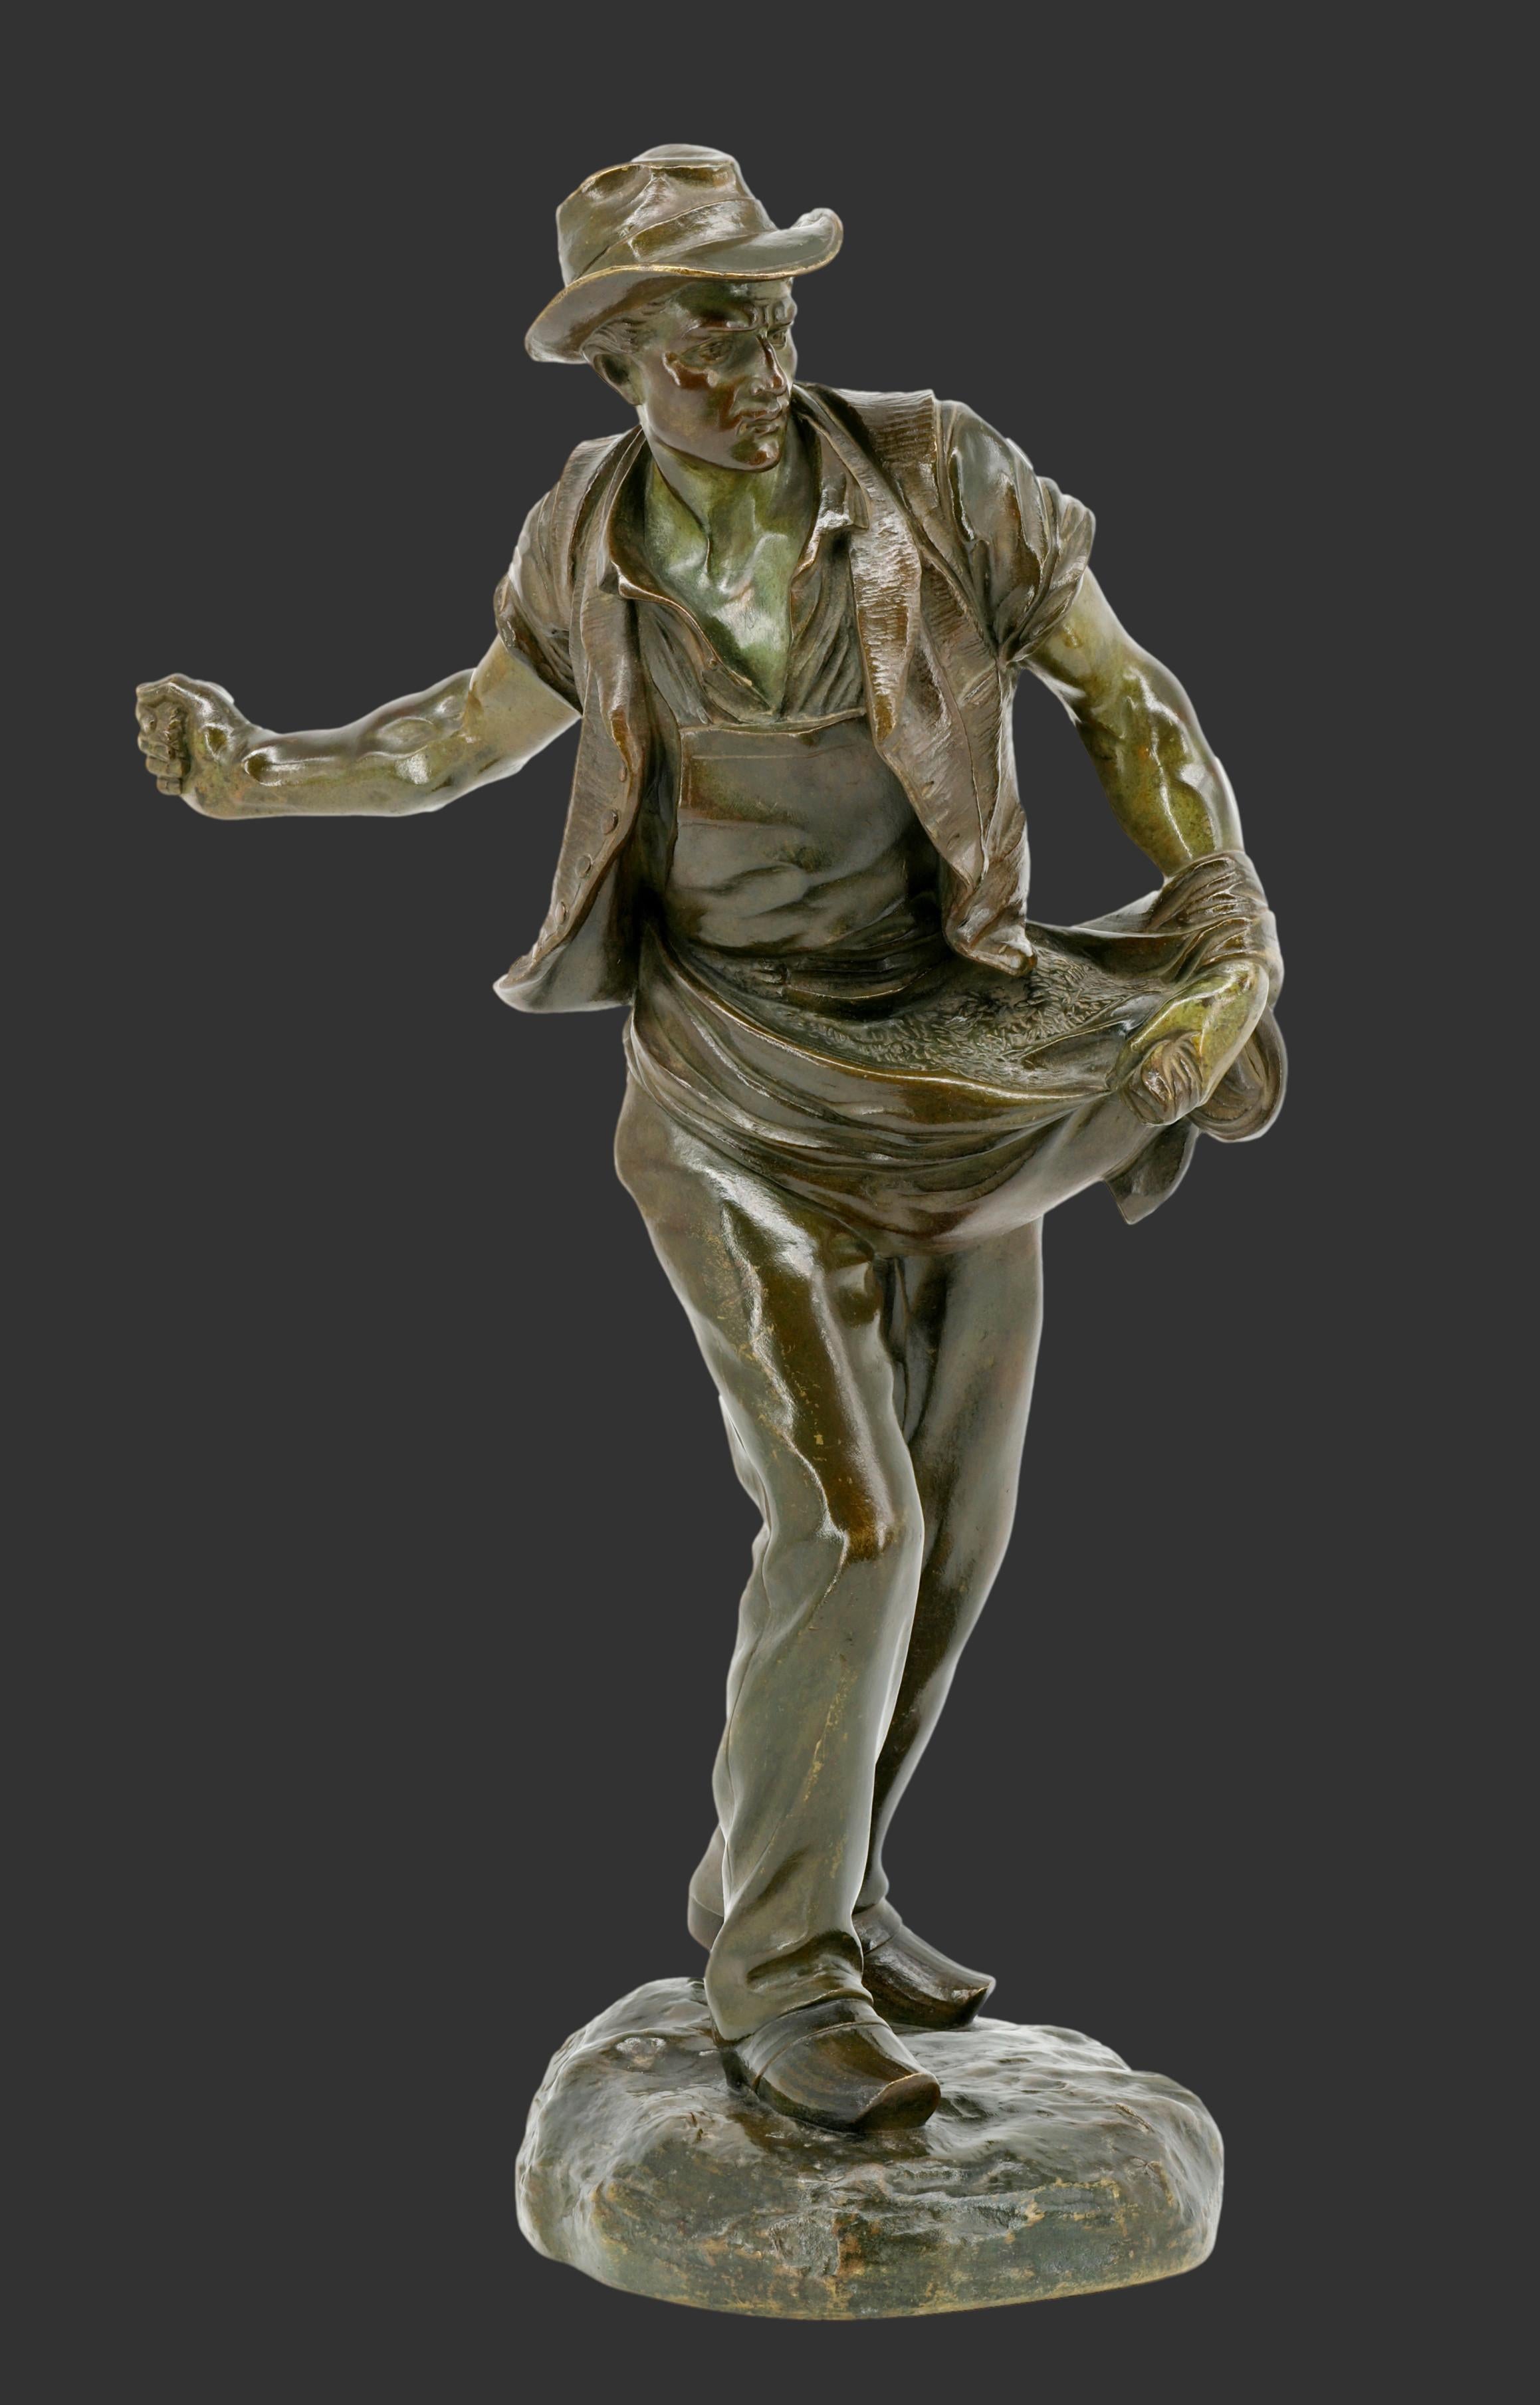 French bronze sculpture by Henri Désiré GAUQUIE (1858-1927), France, ca.1910. The sower. Height : 18.25